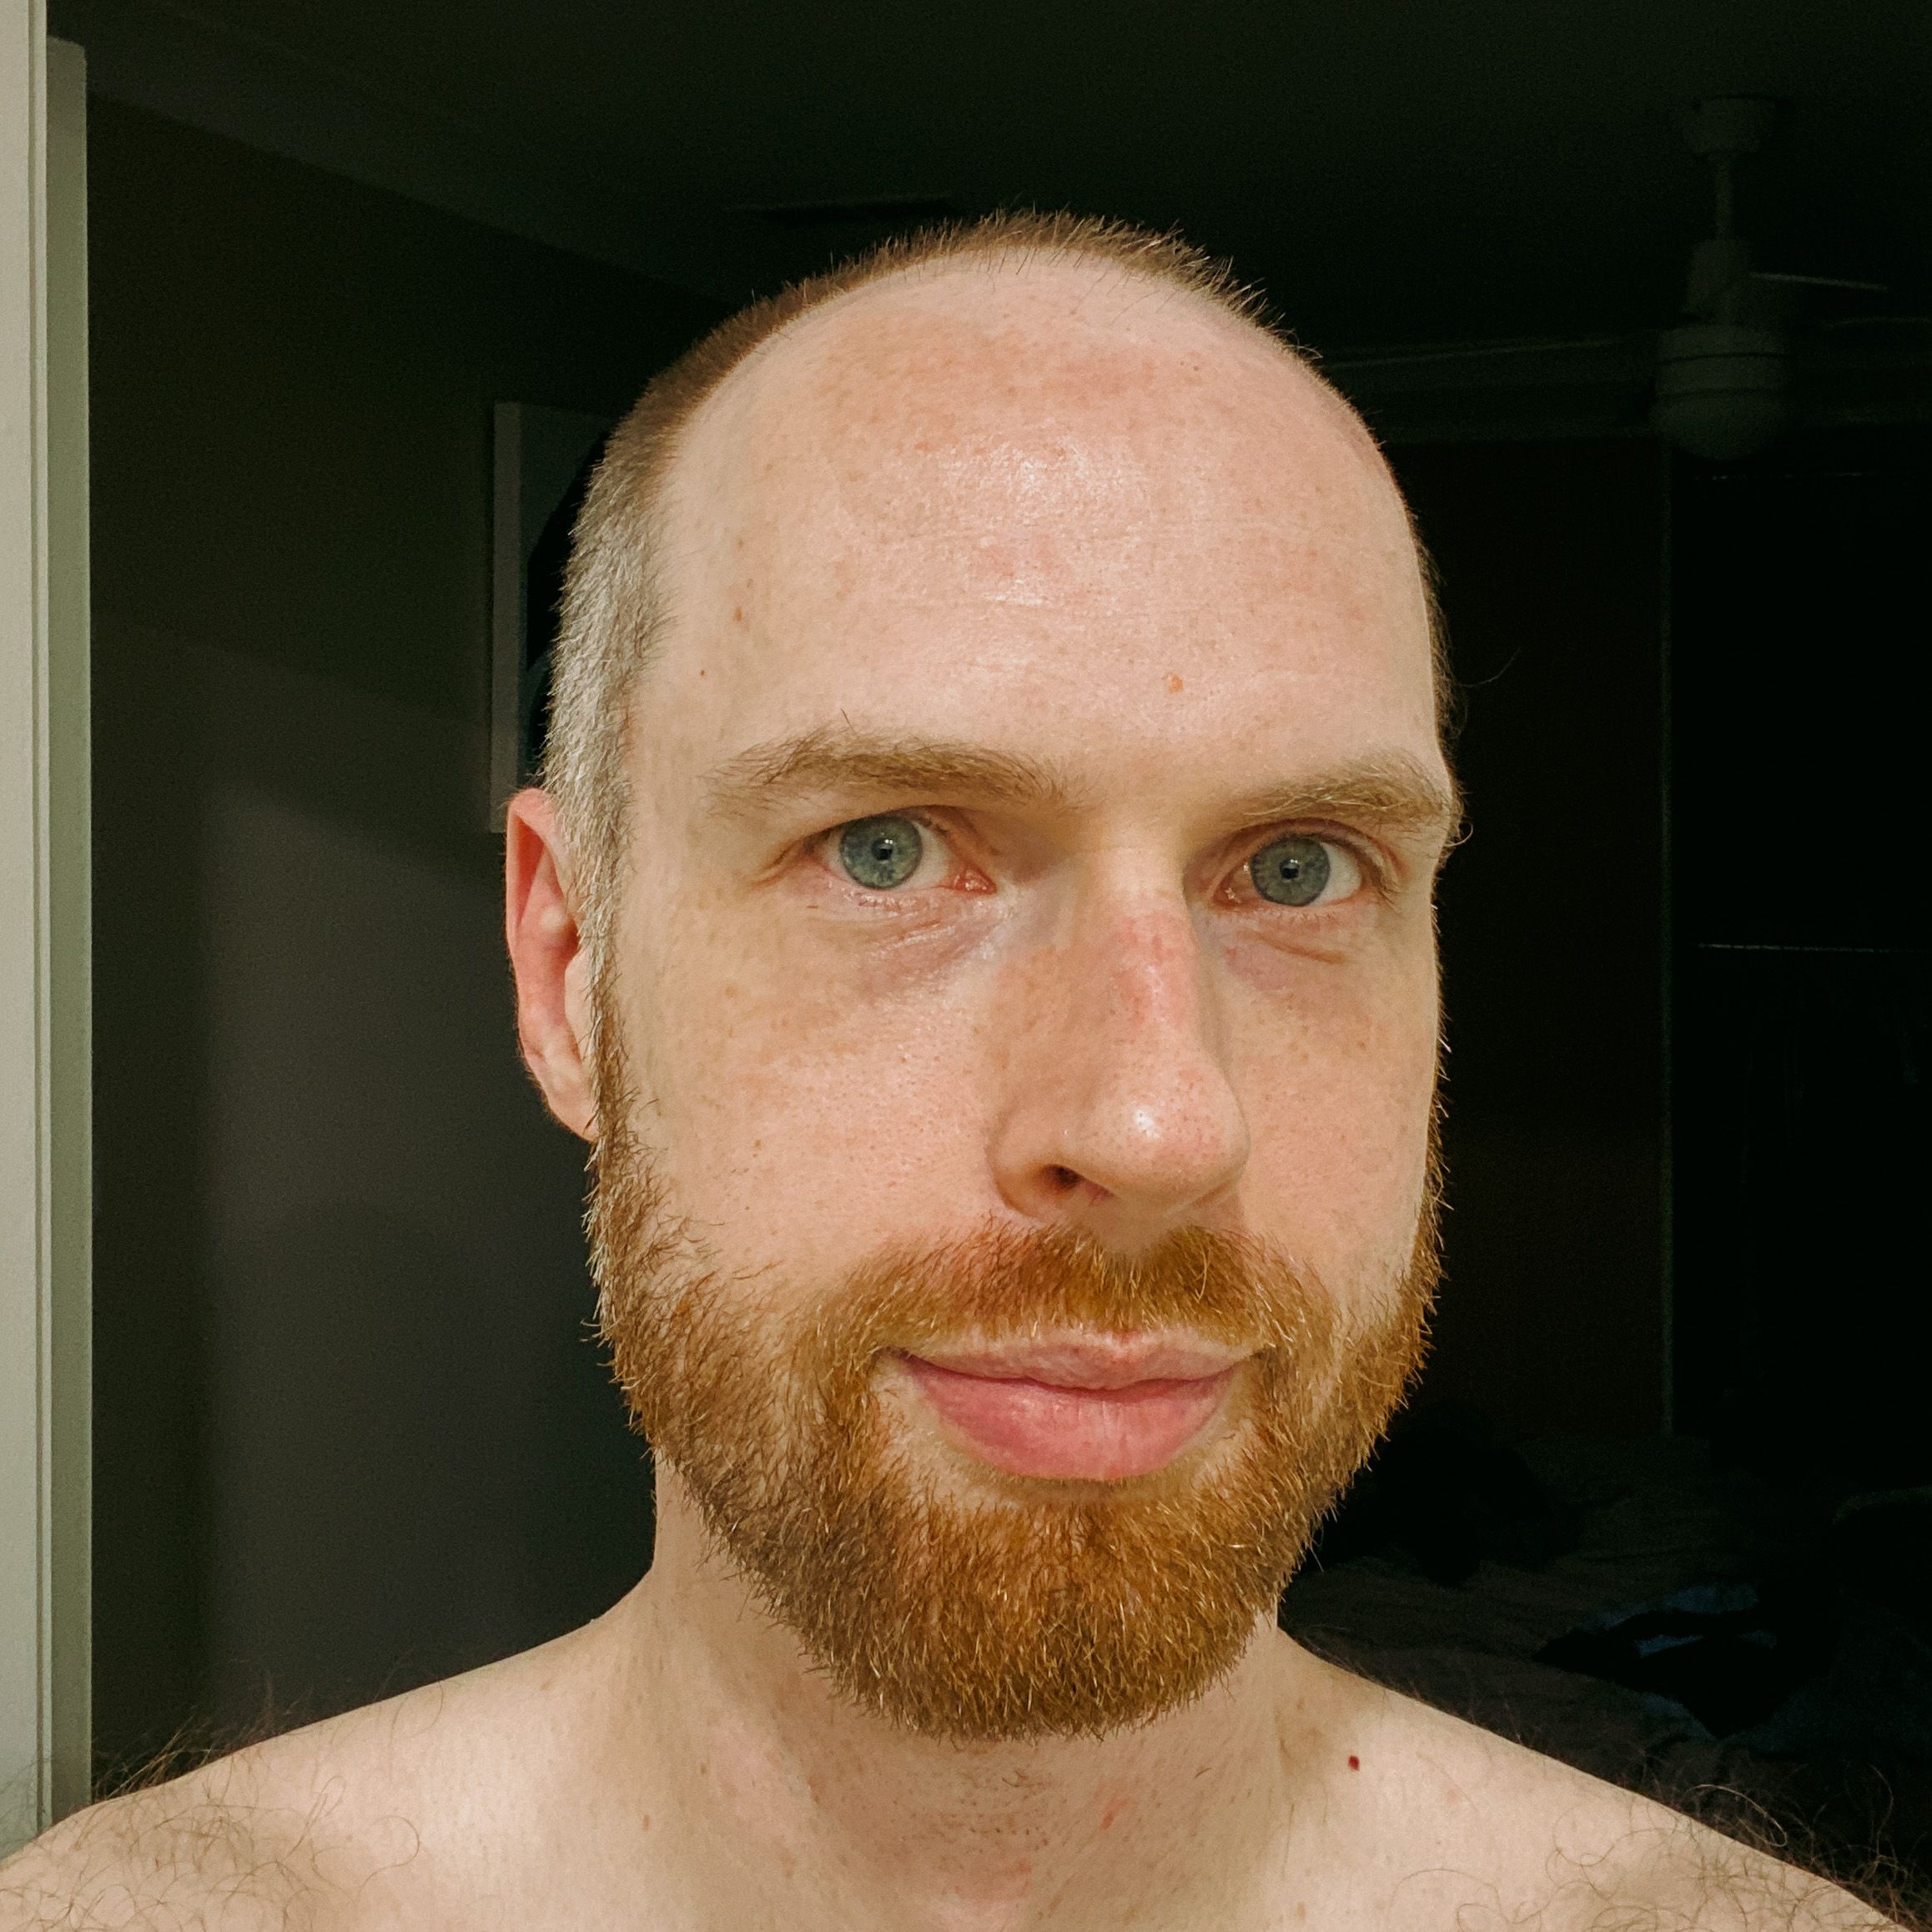 Me again, but with an extremely neatly trimmed haircut and beard, done with #2 hair clippers.